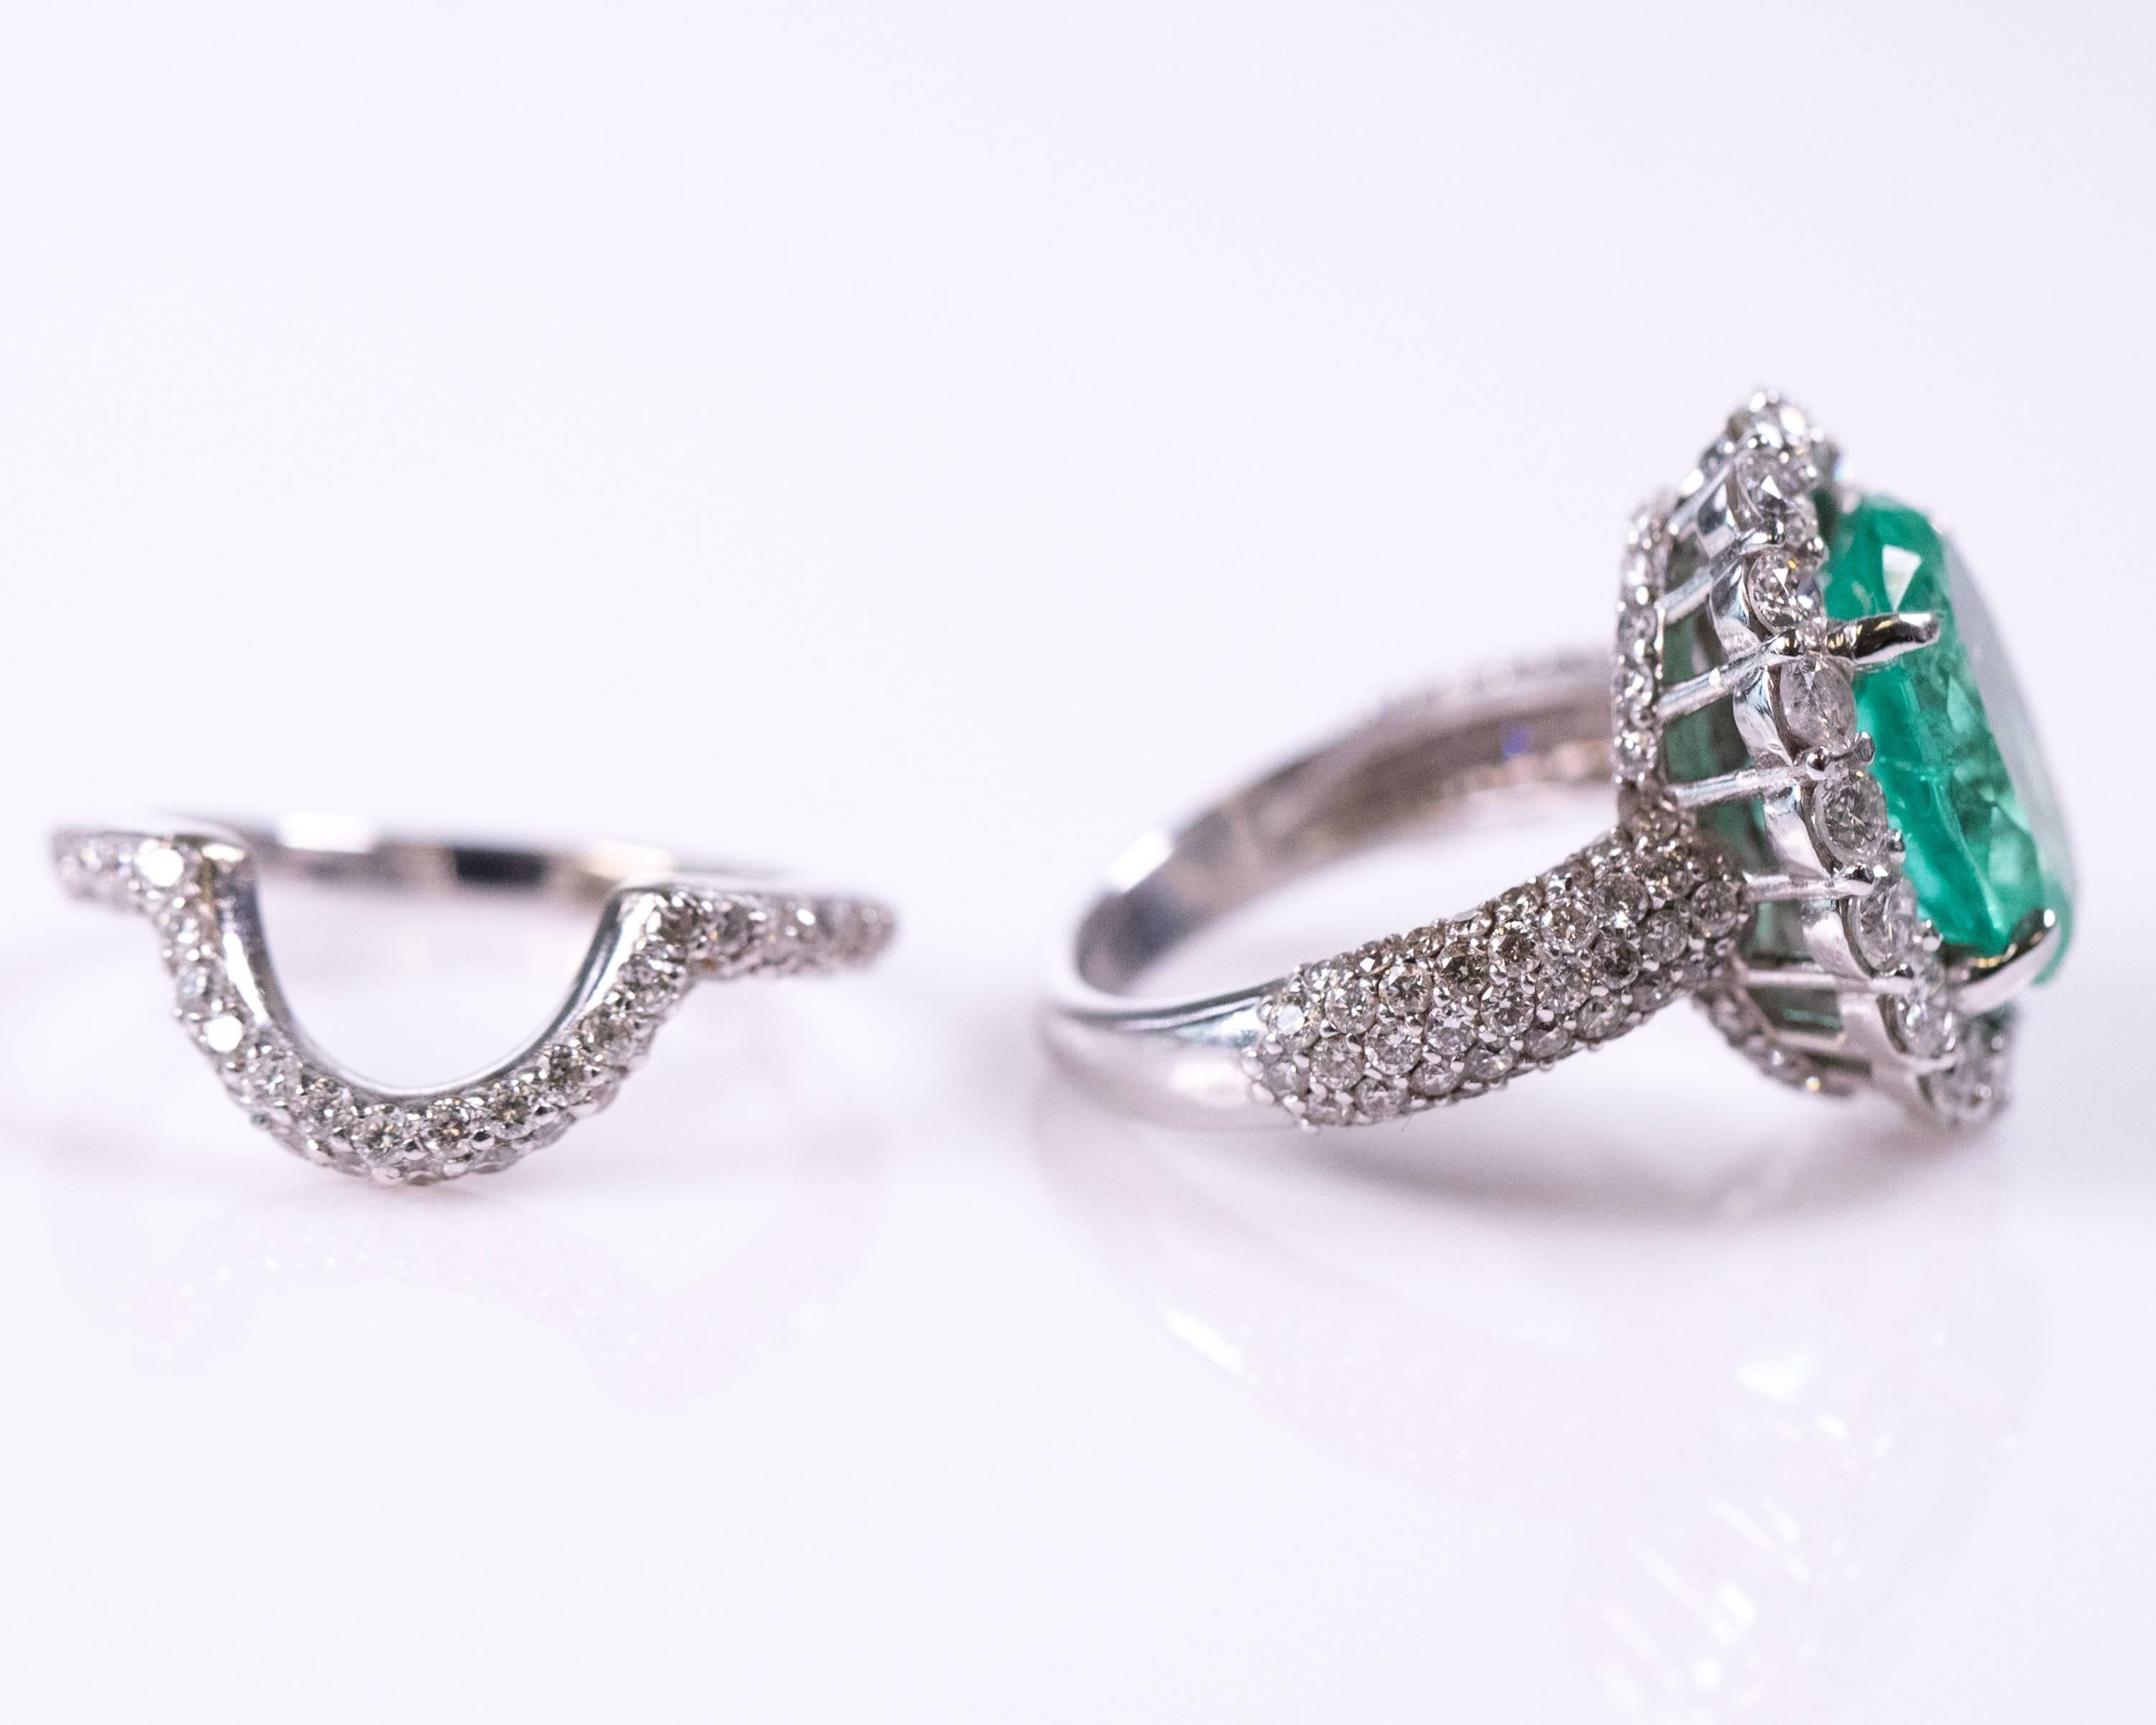 This Wedding Ring Set features a gorgeous 5 Carat Emerald Diamond ring, accompanied with a matching diamond band, which can double as a Cocktail Ring. The Emerald Ring features a Diamond Halo, a diamond bridge profile and 5 rows of diamonds on the